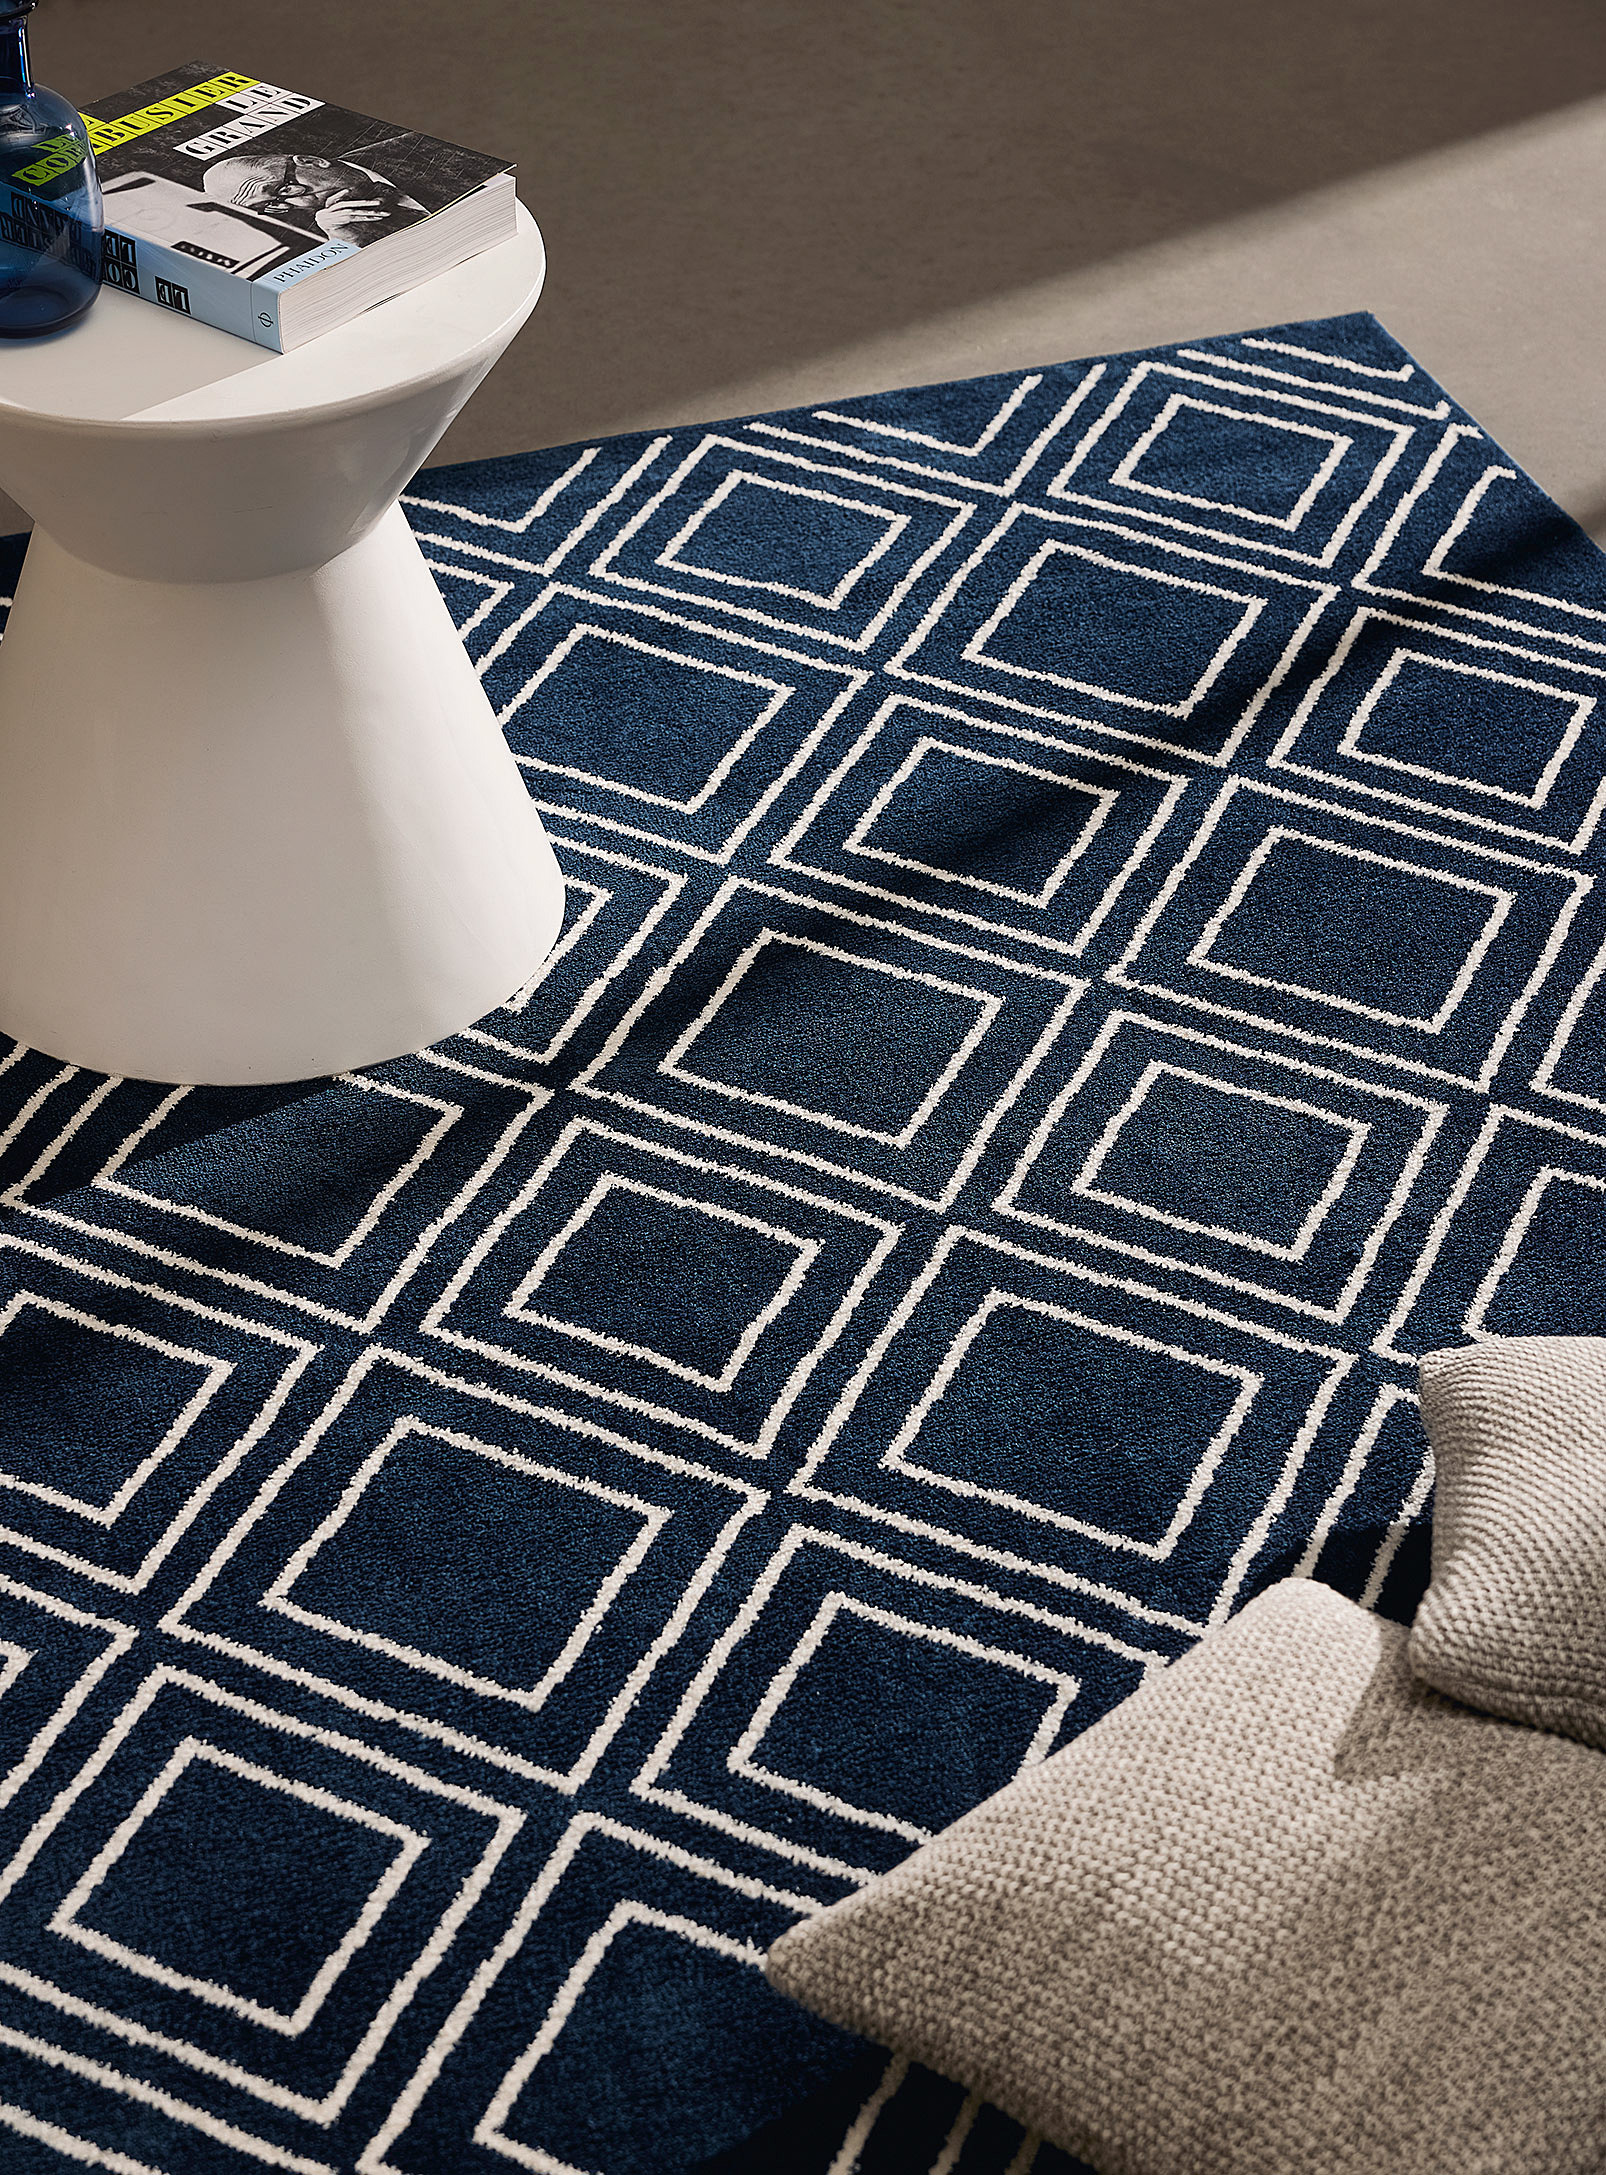 Simons Maison Sumptuous Diamond Pattern Rug See Available Sizes In Patterned Blue